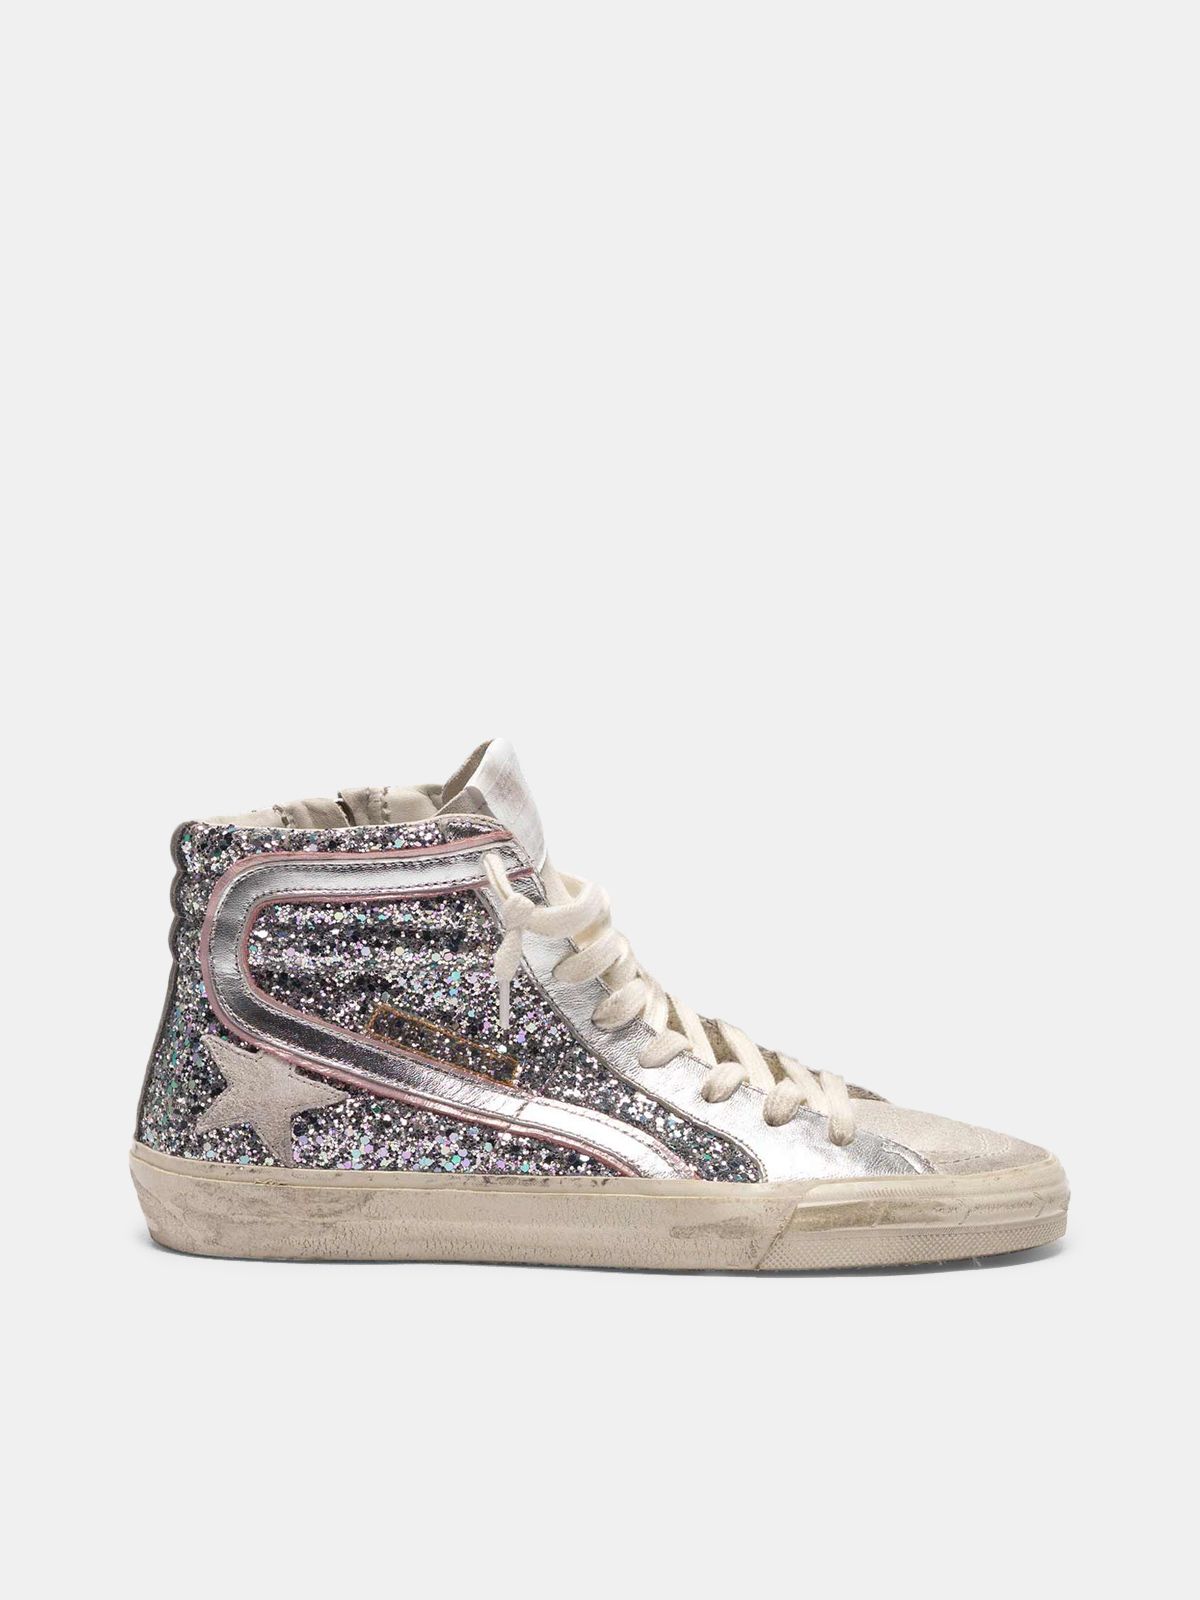 Slide sneakers in silver laminated leather and glitter